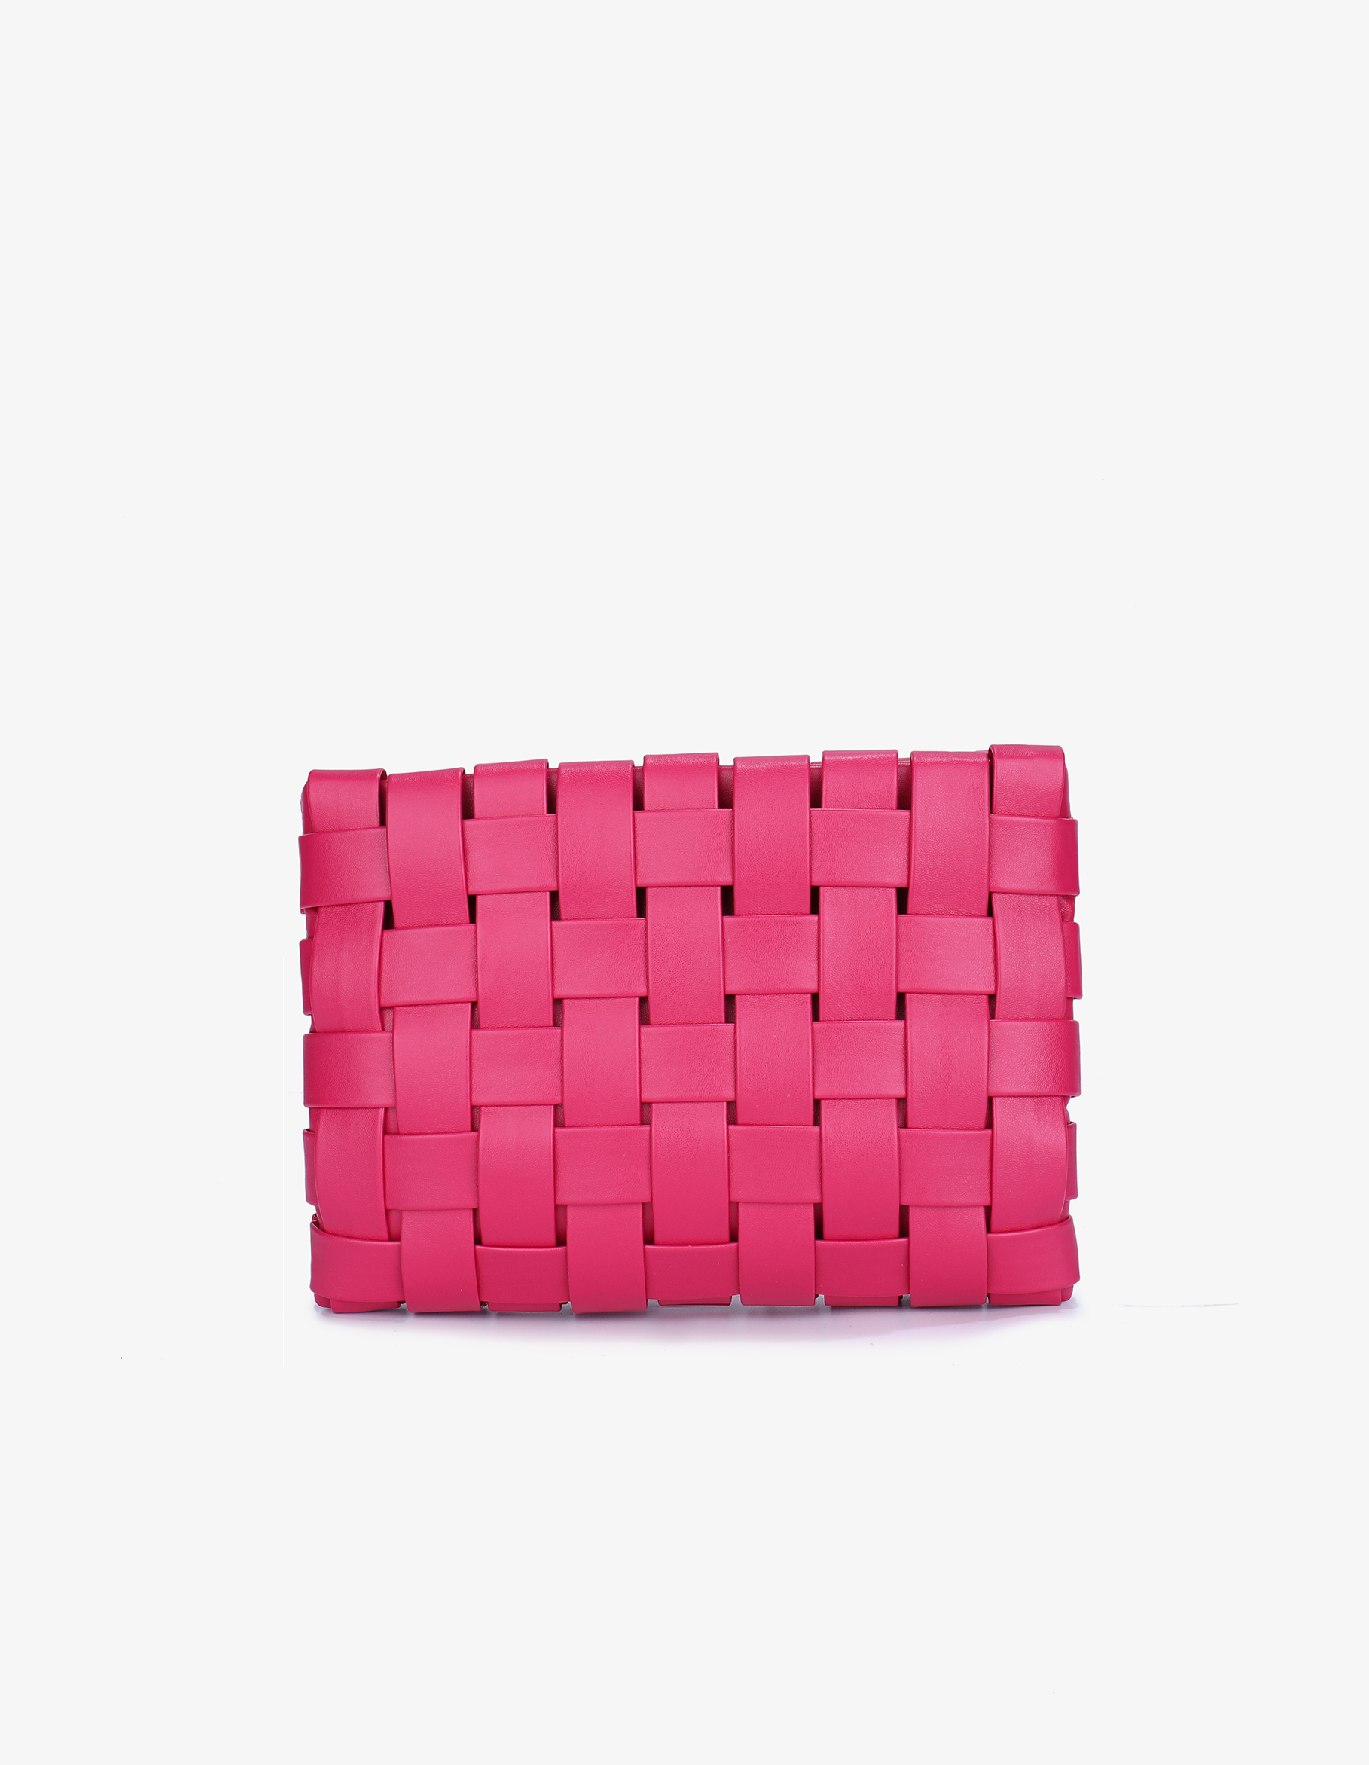 LINDY CLUTCH WOVEN LARGE MAGENTA